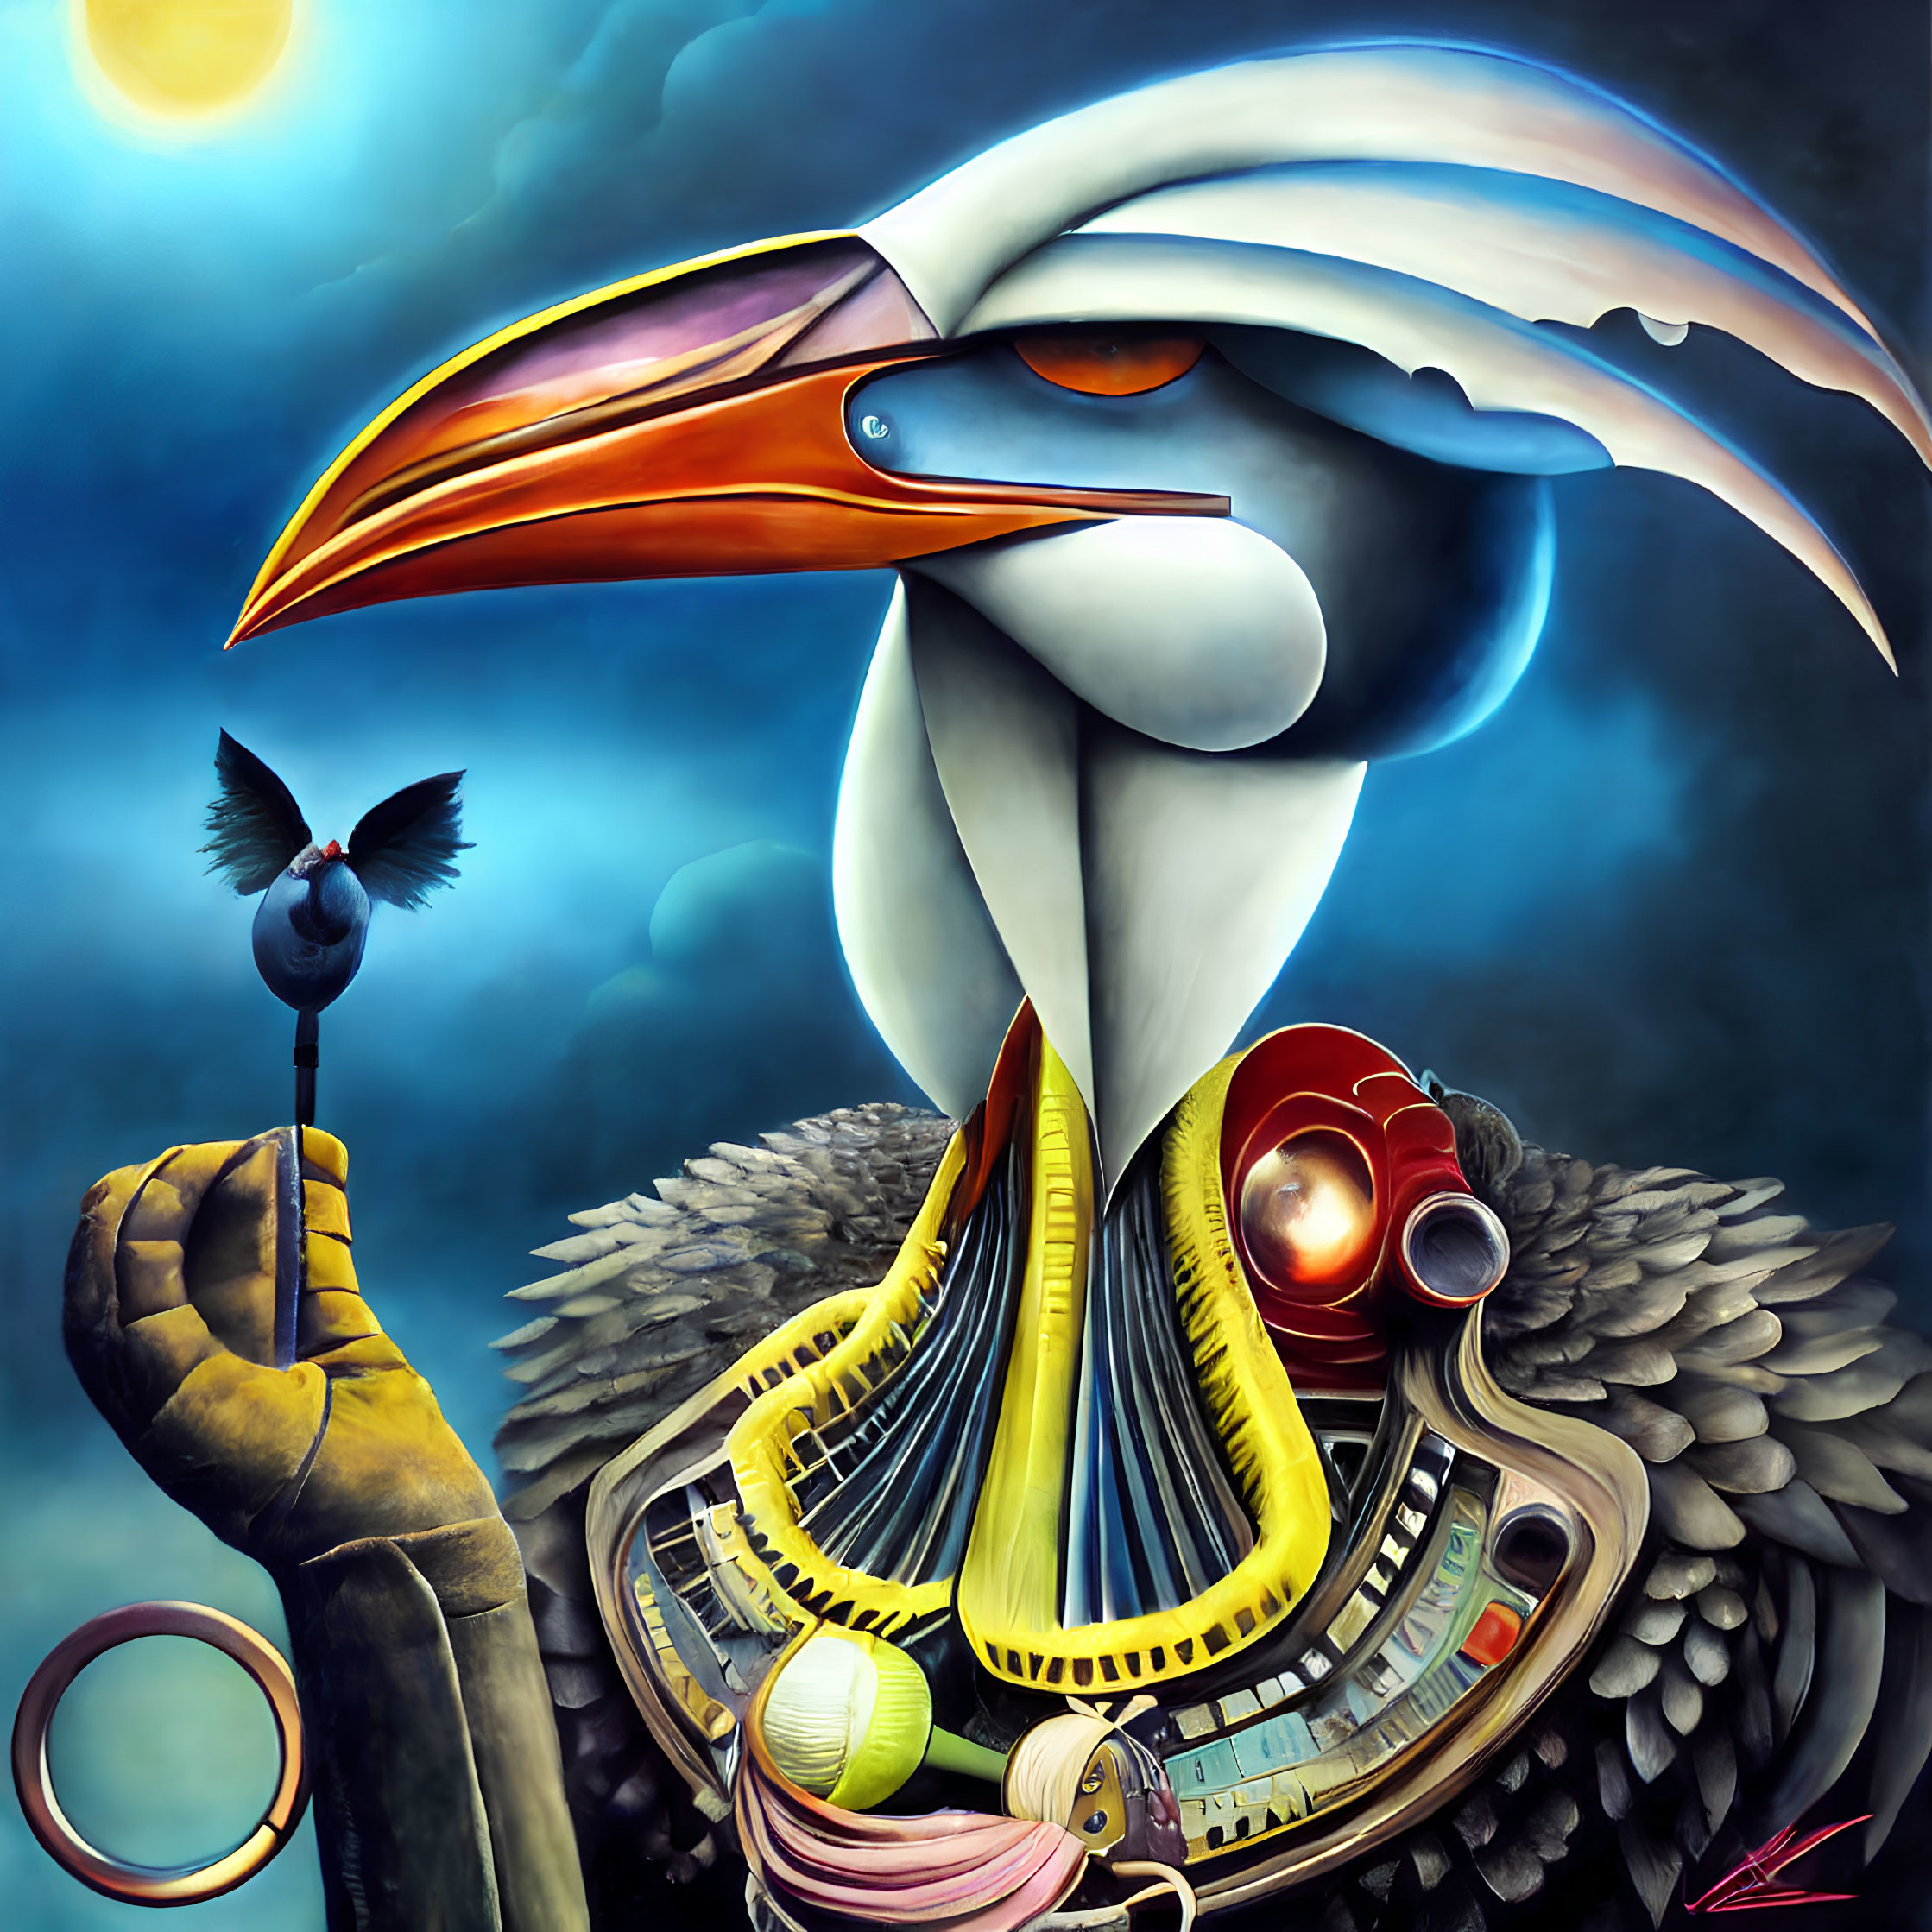 Colorful Surrealist Painting: Mechanical Pelican with Intricate Inner Workings Holding a Bird in Moon